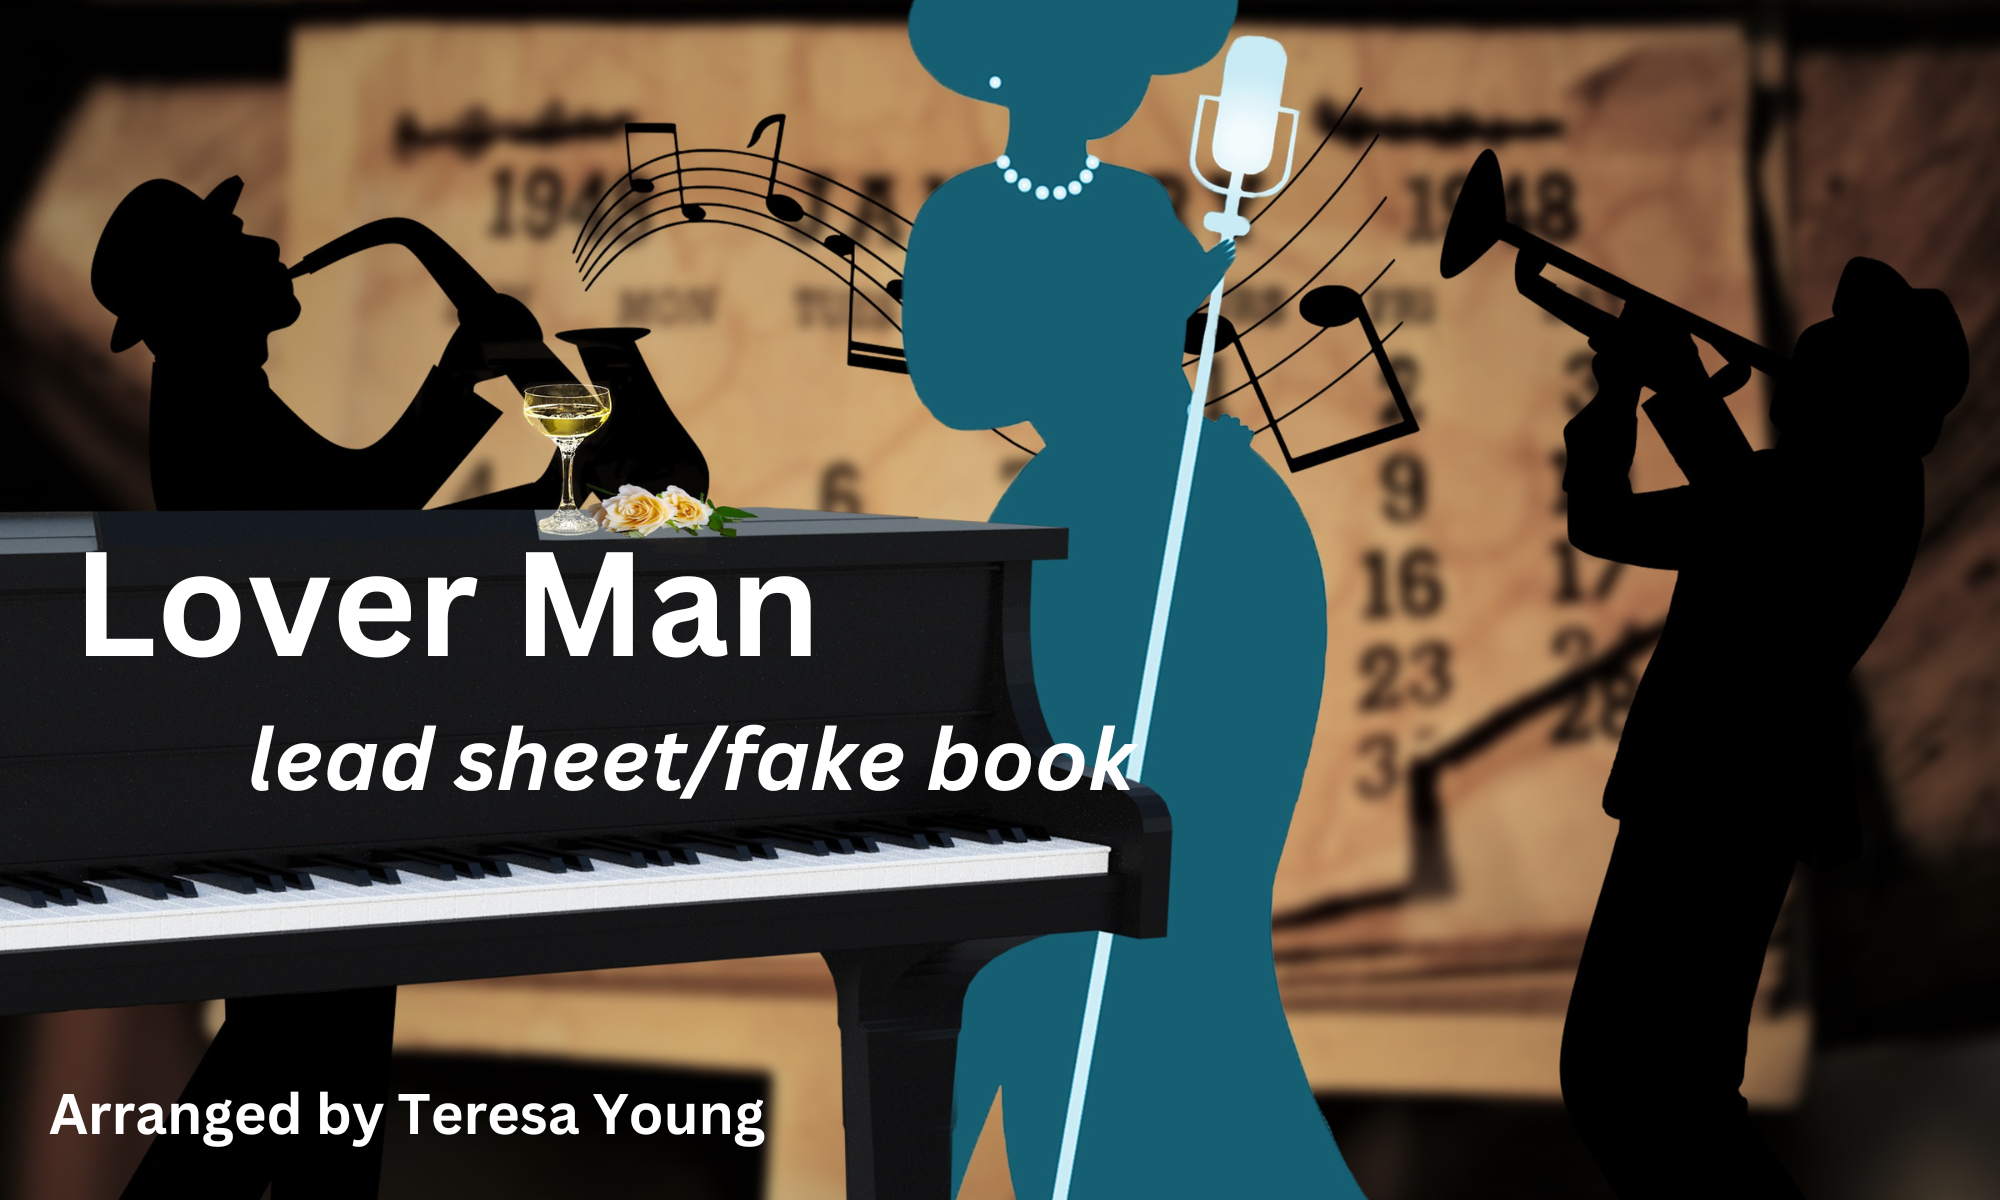 Lover Man, lead sheet, arranged by Teresa Young